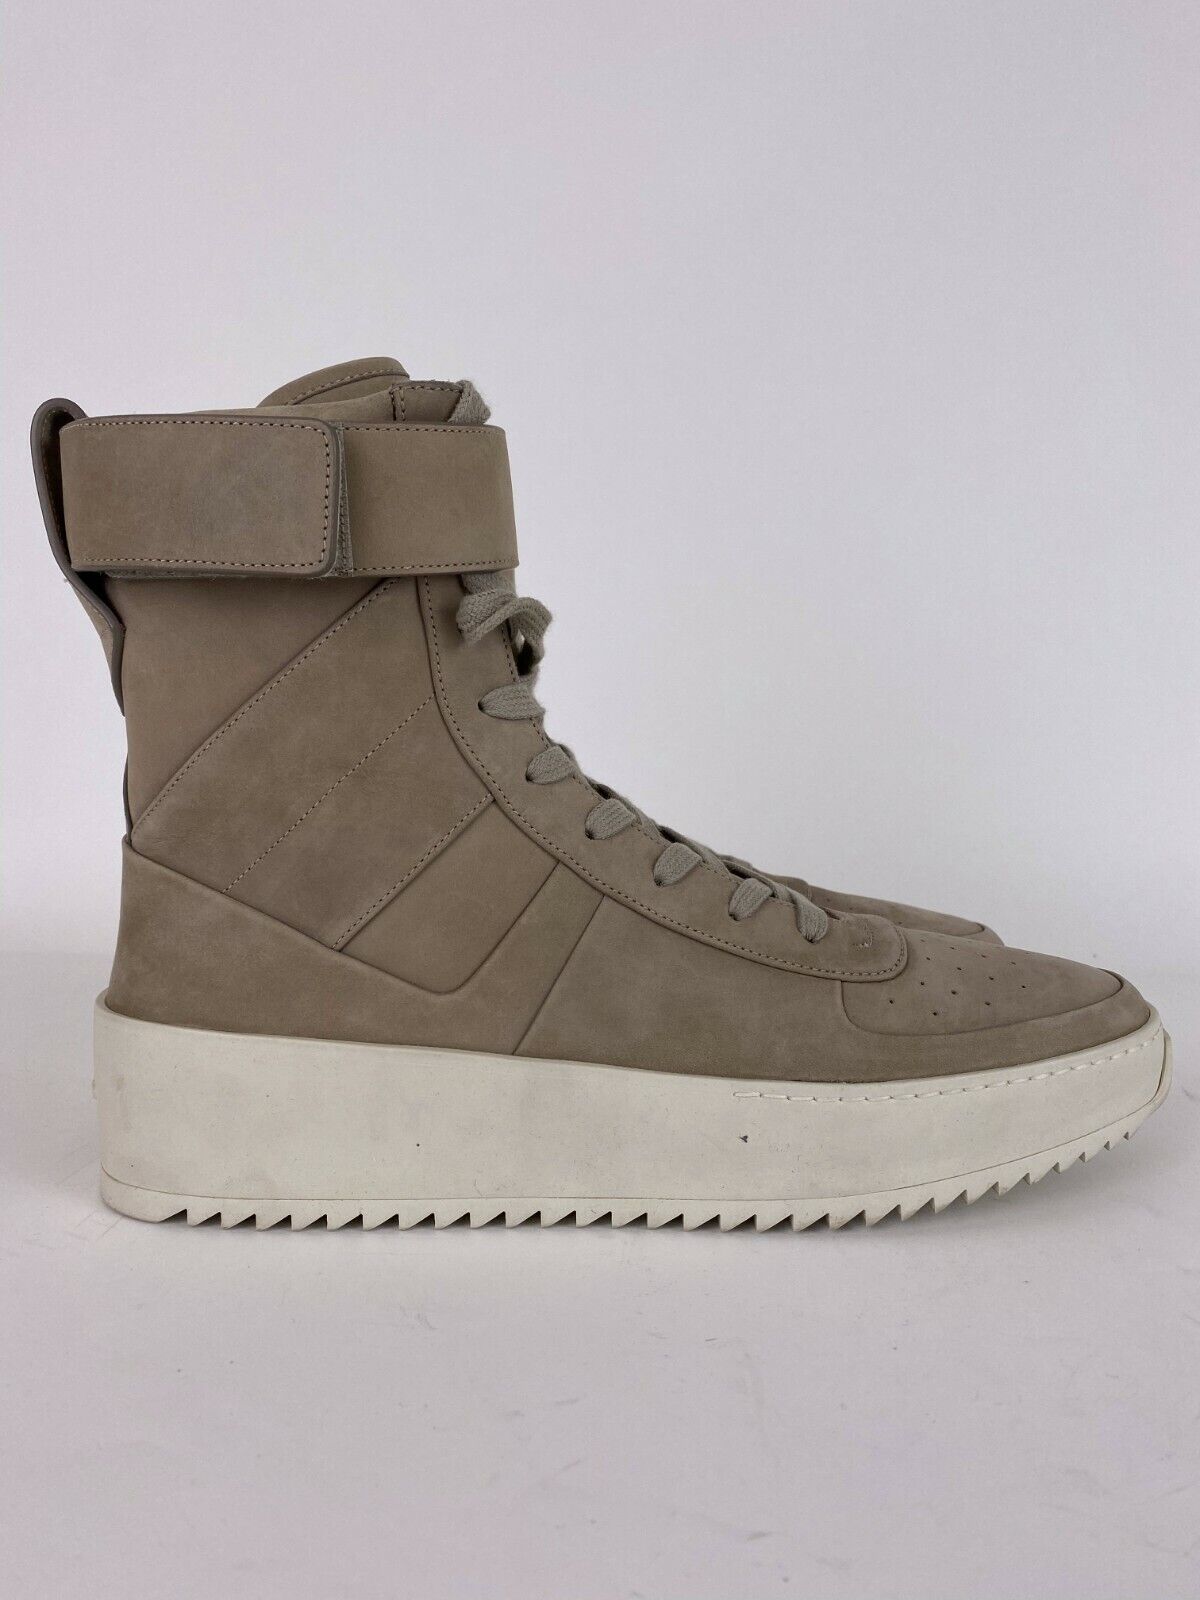 FEAR OF GOD MILITARY TRAINER SNEAKERS GREY EU 44